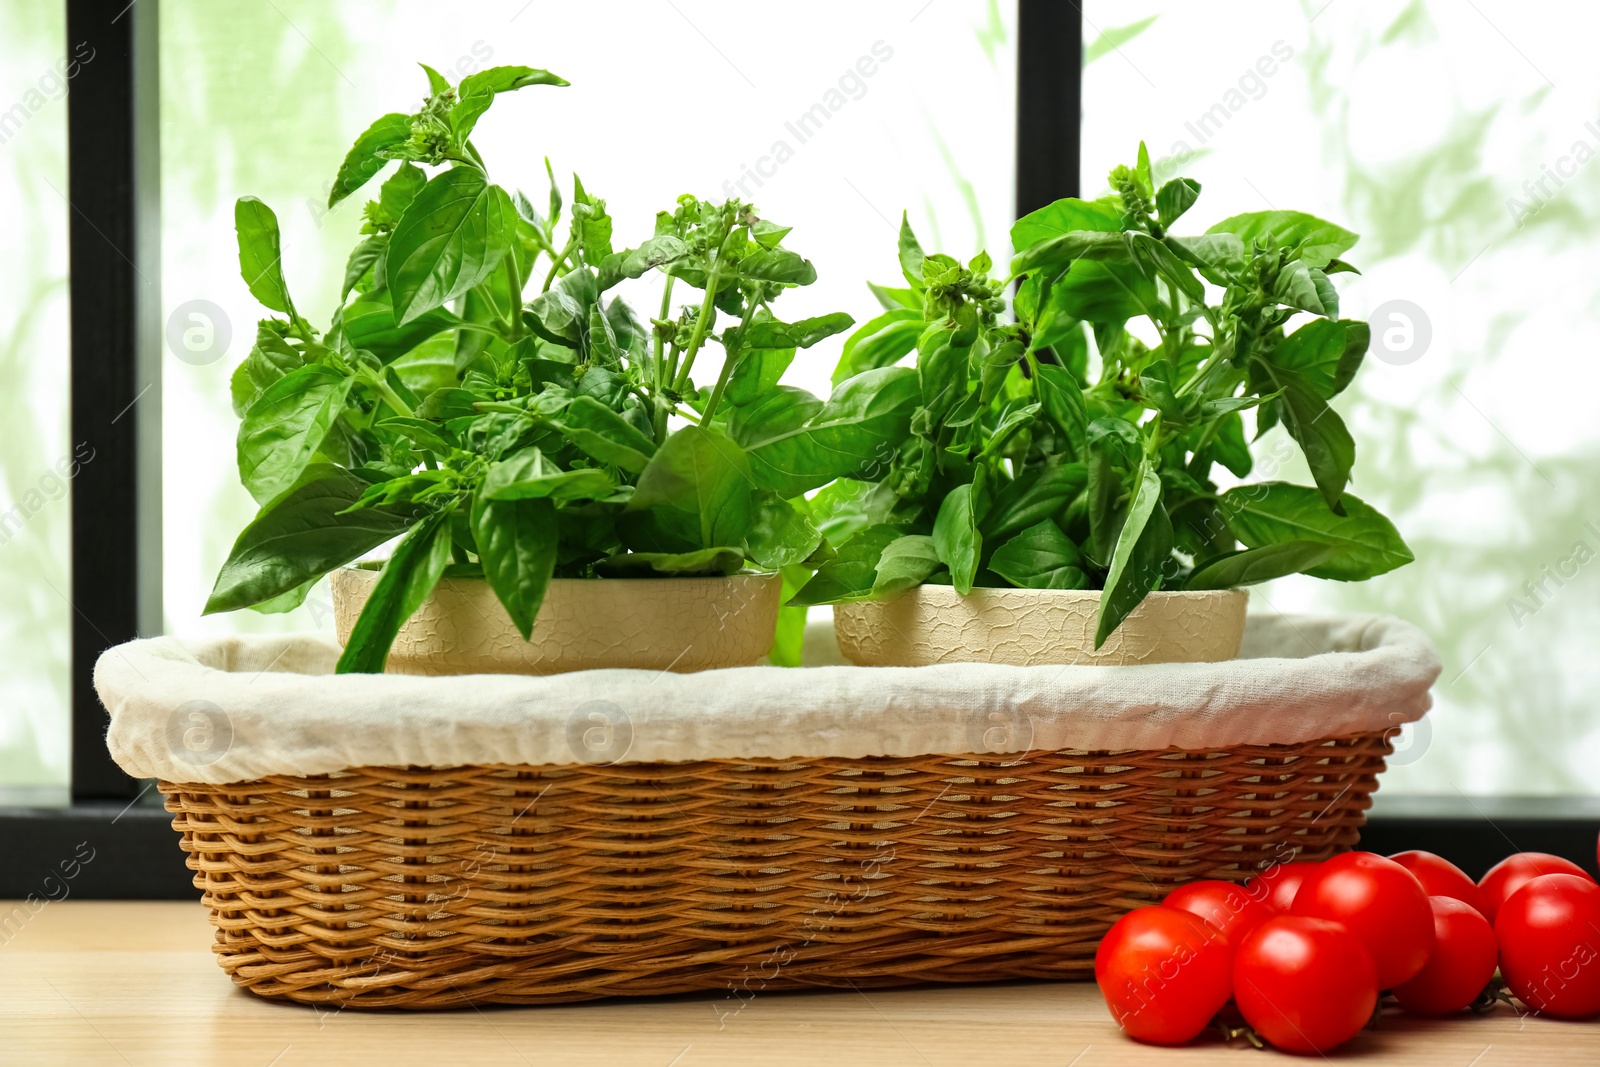 Photo of Green basil plants and tomatoes on window sill indoors